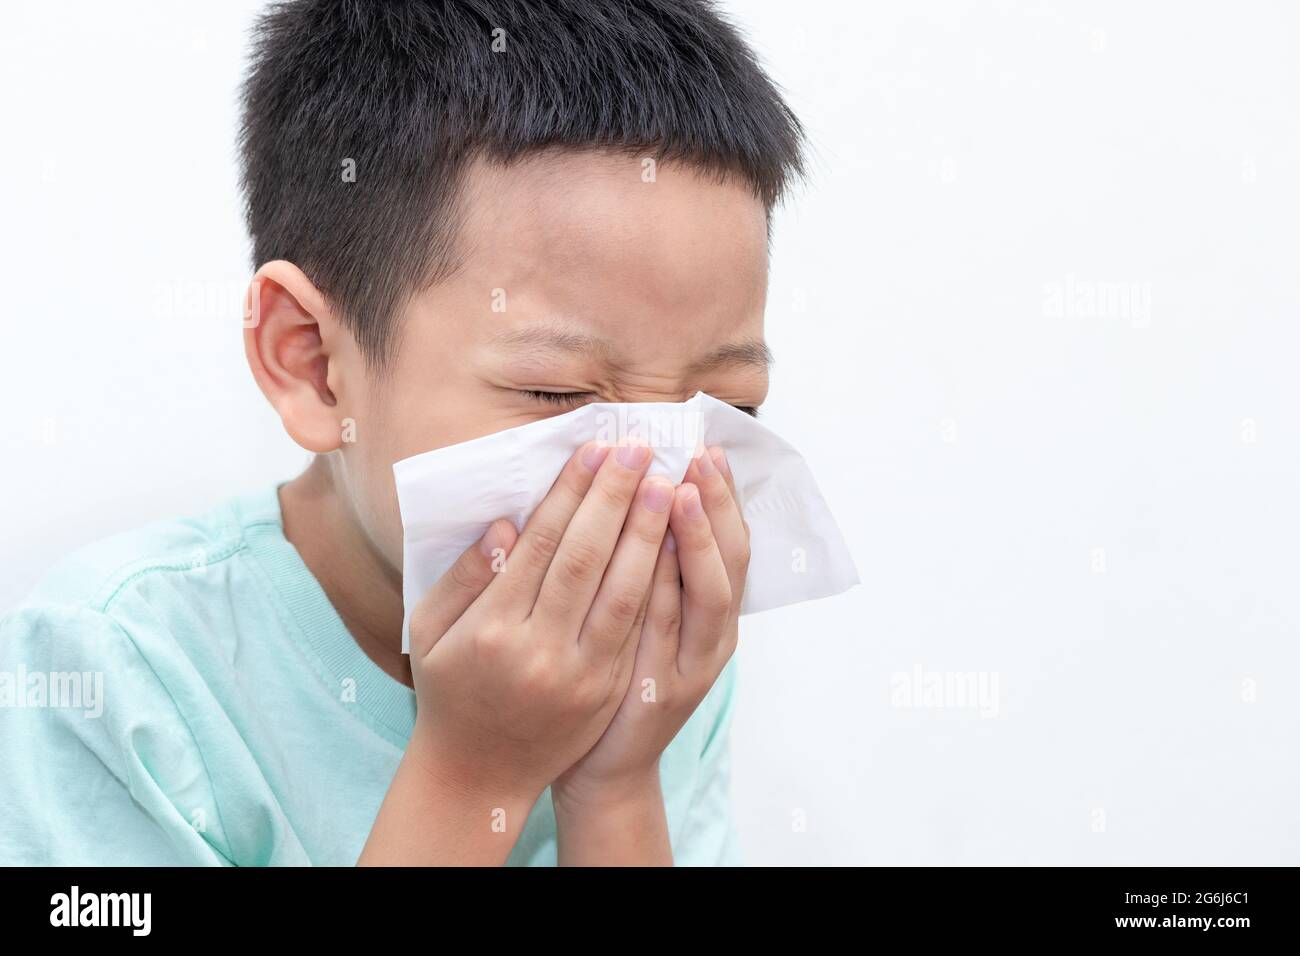 Asian little boy blowing his nose or cleaning nose with tissue. The little boy was sick and was sneezing isolated white background. Stock Photo